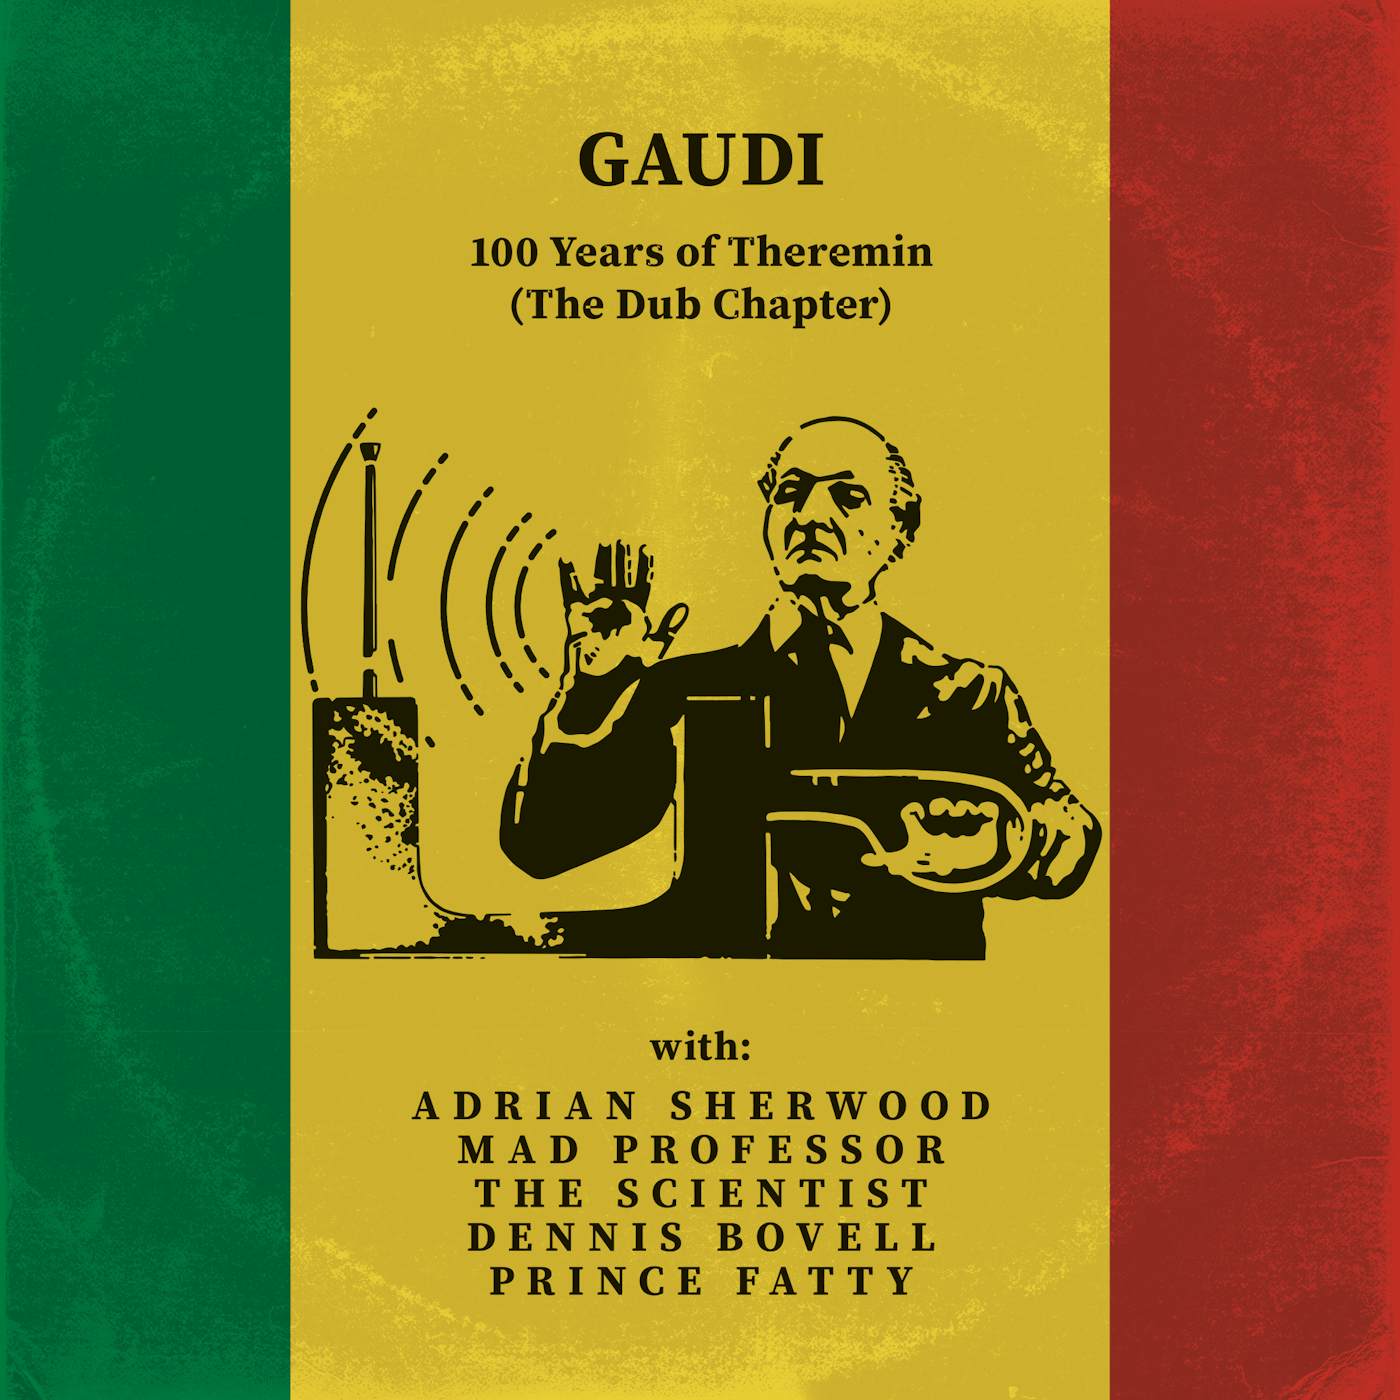 Gaudi 100 Years of Theremin (The Dub Chapter) Vinyl Record